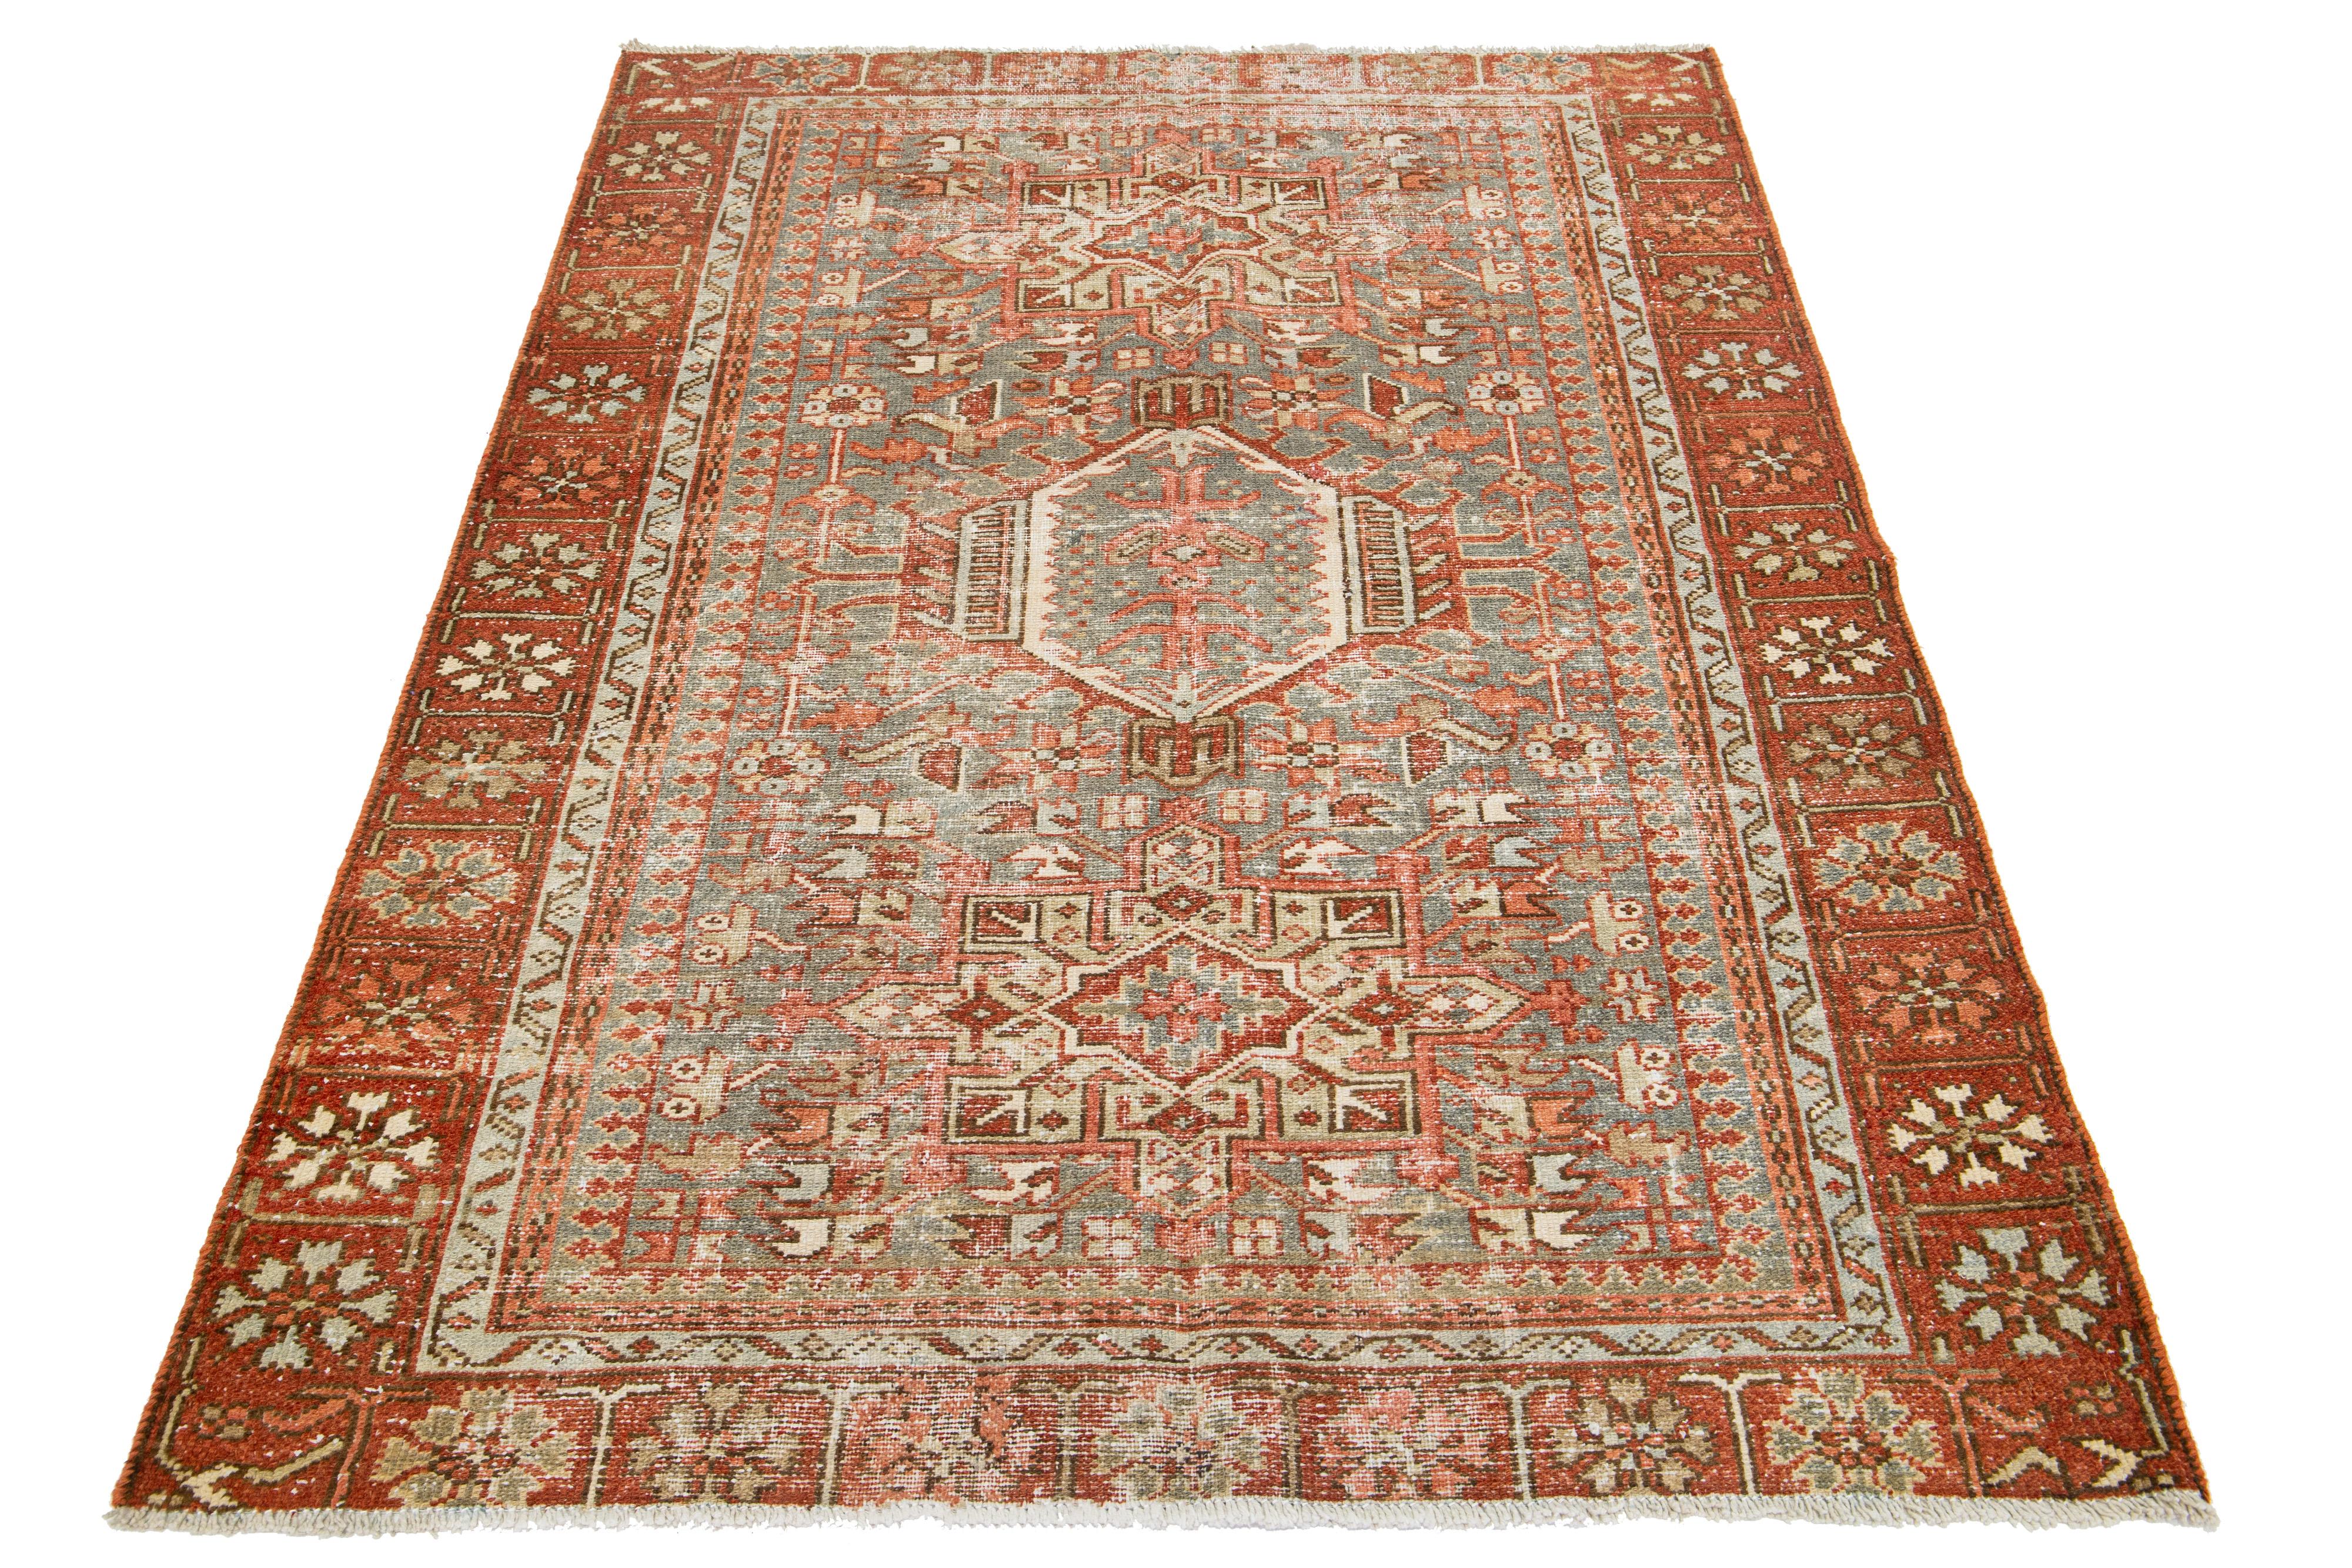 This antique Persian Heriz rug is made with hand-knotted wool. The blue-gray field showcases a captivating tribal pattern with beige and rust shades.

This rug measures 4'4